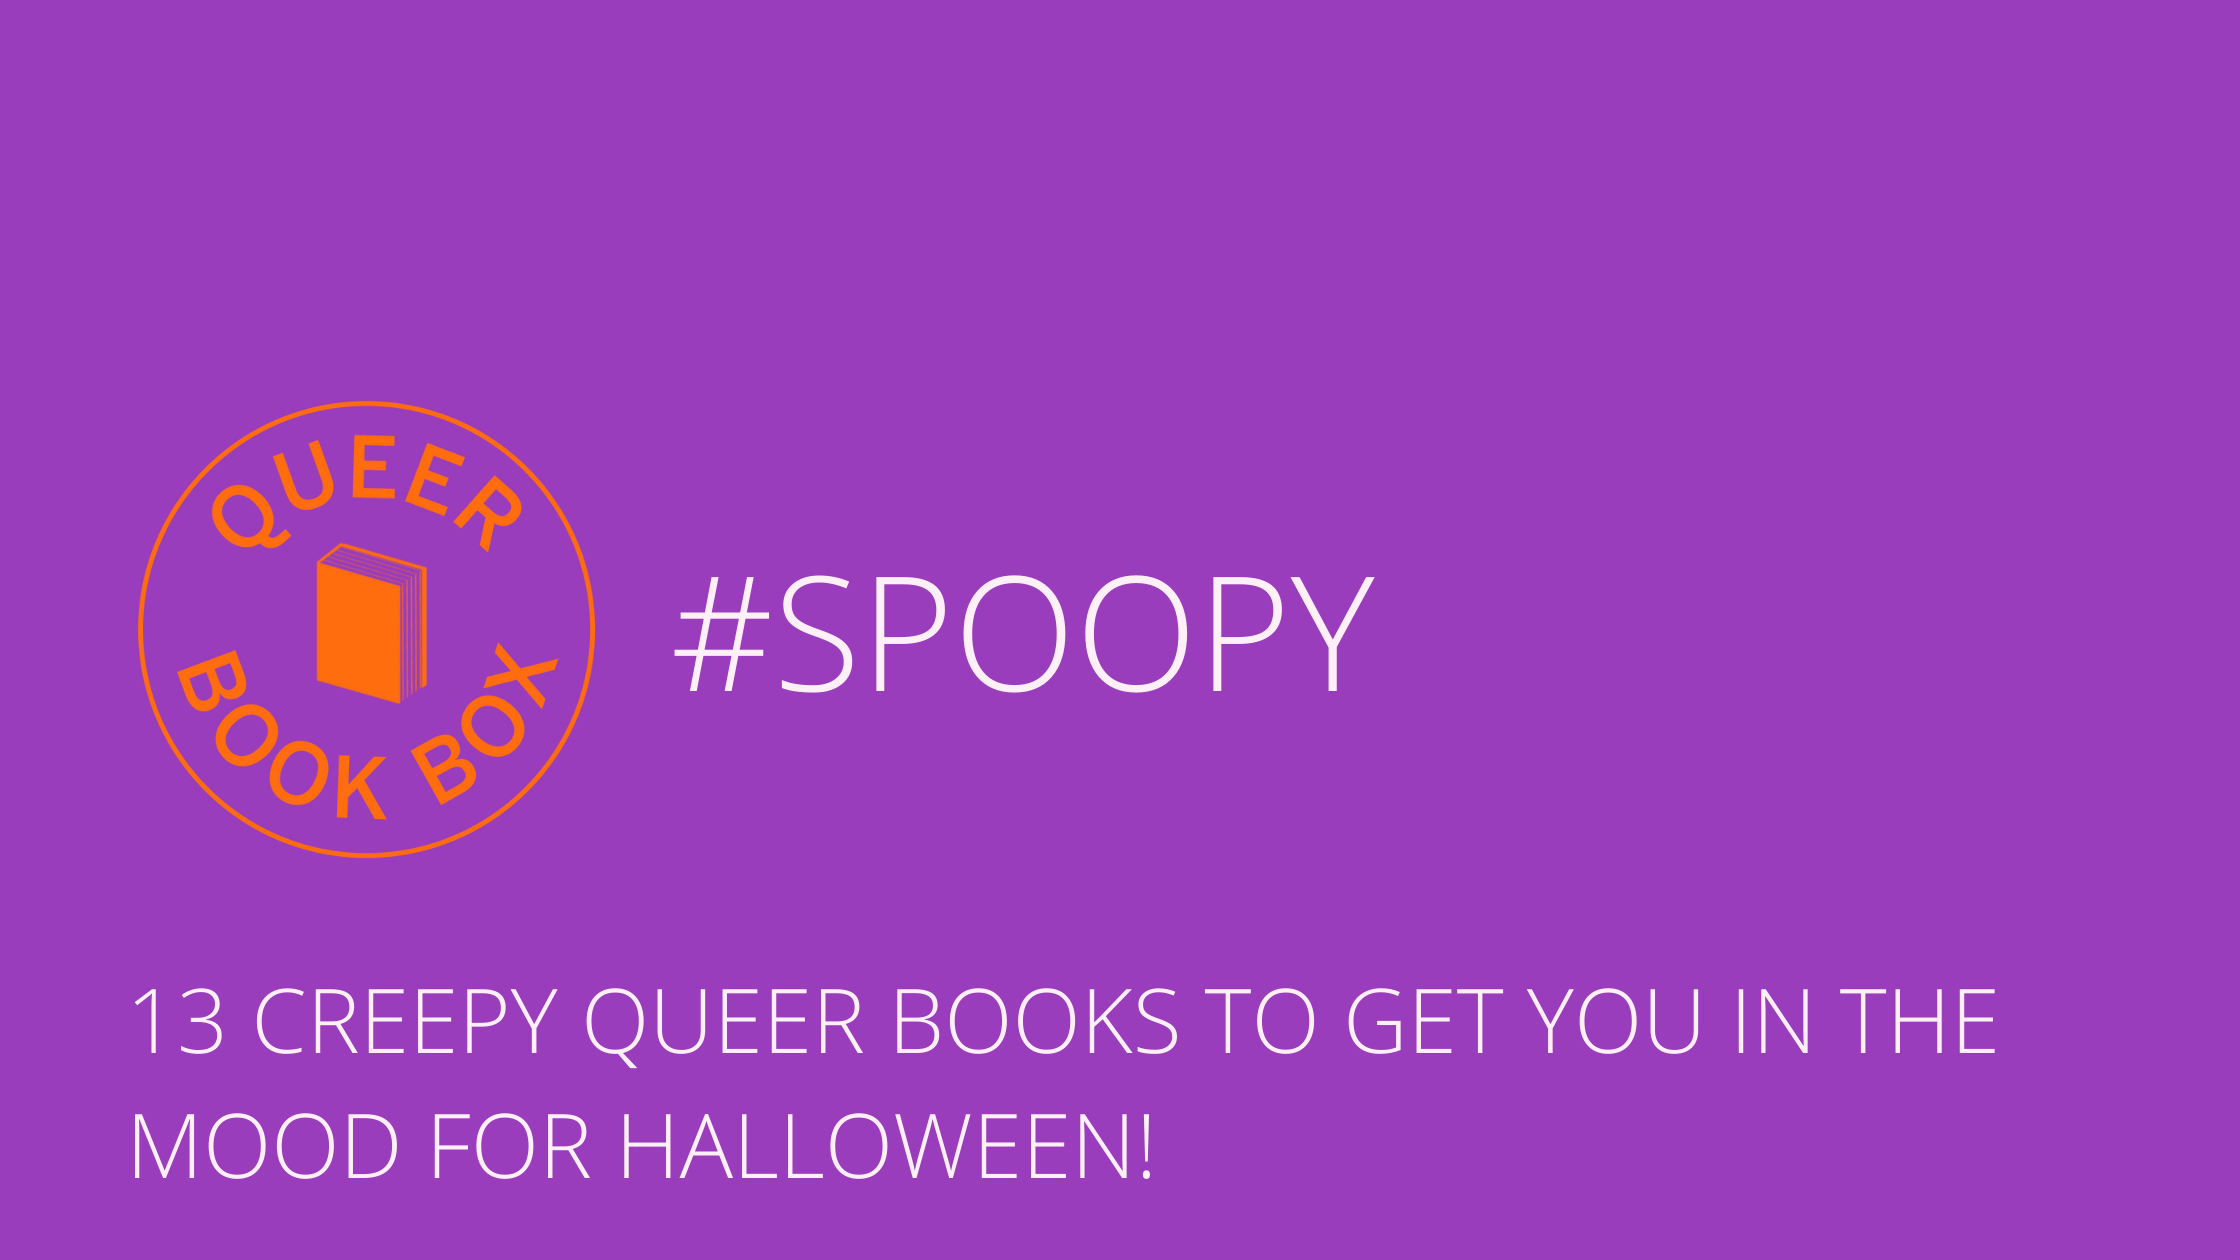 13 creepy queer books to get you in the mood for Halloween!